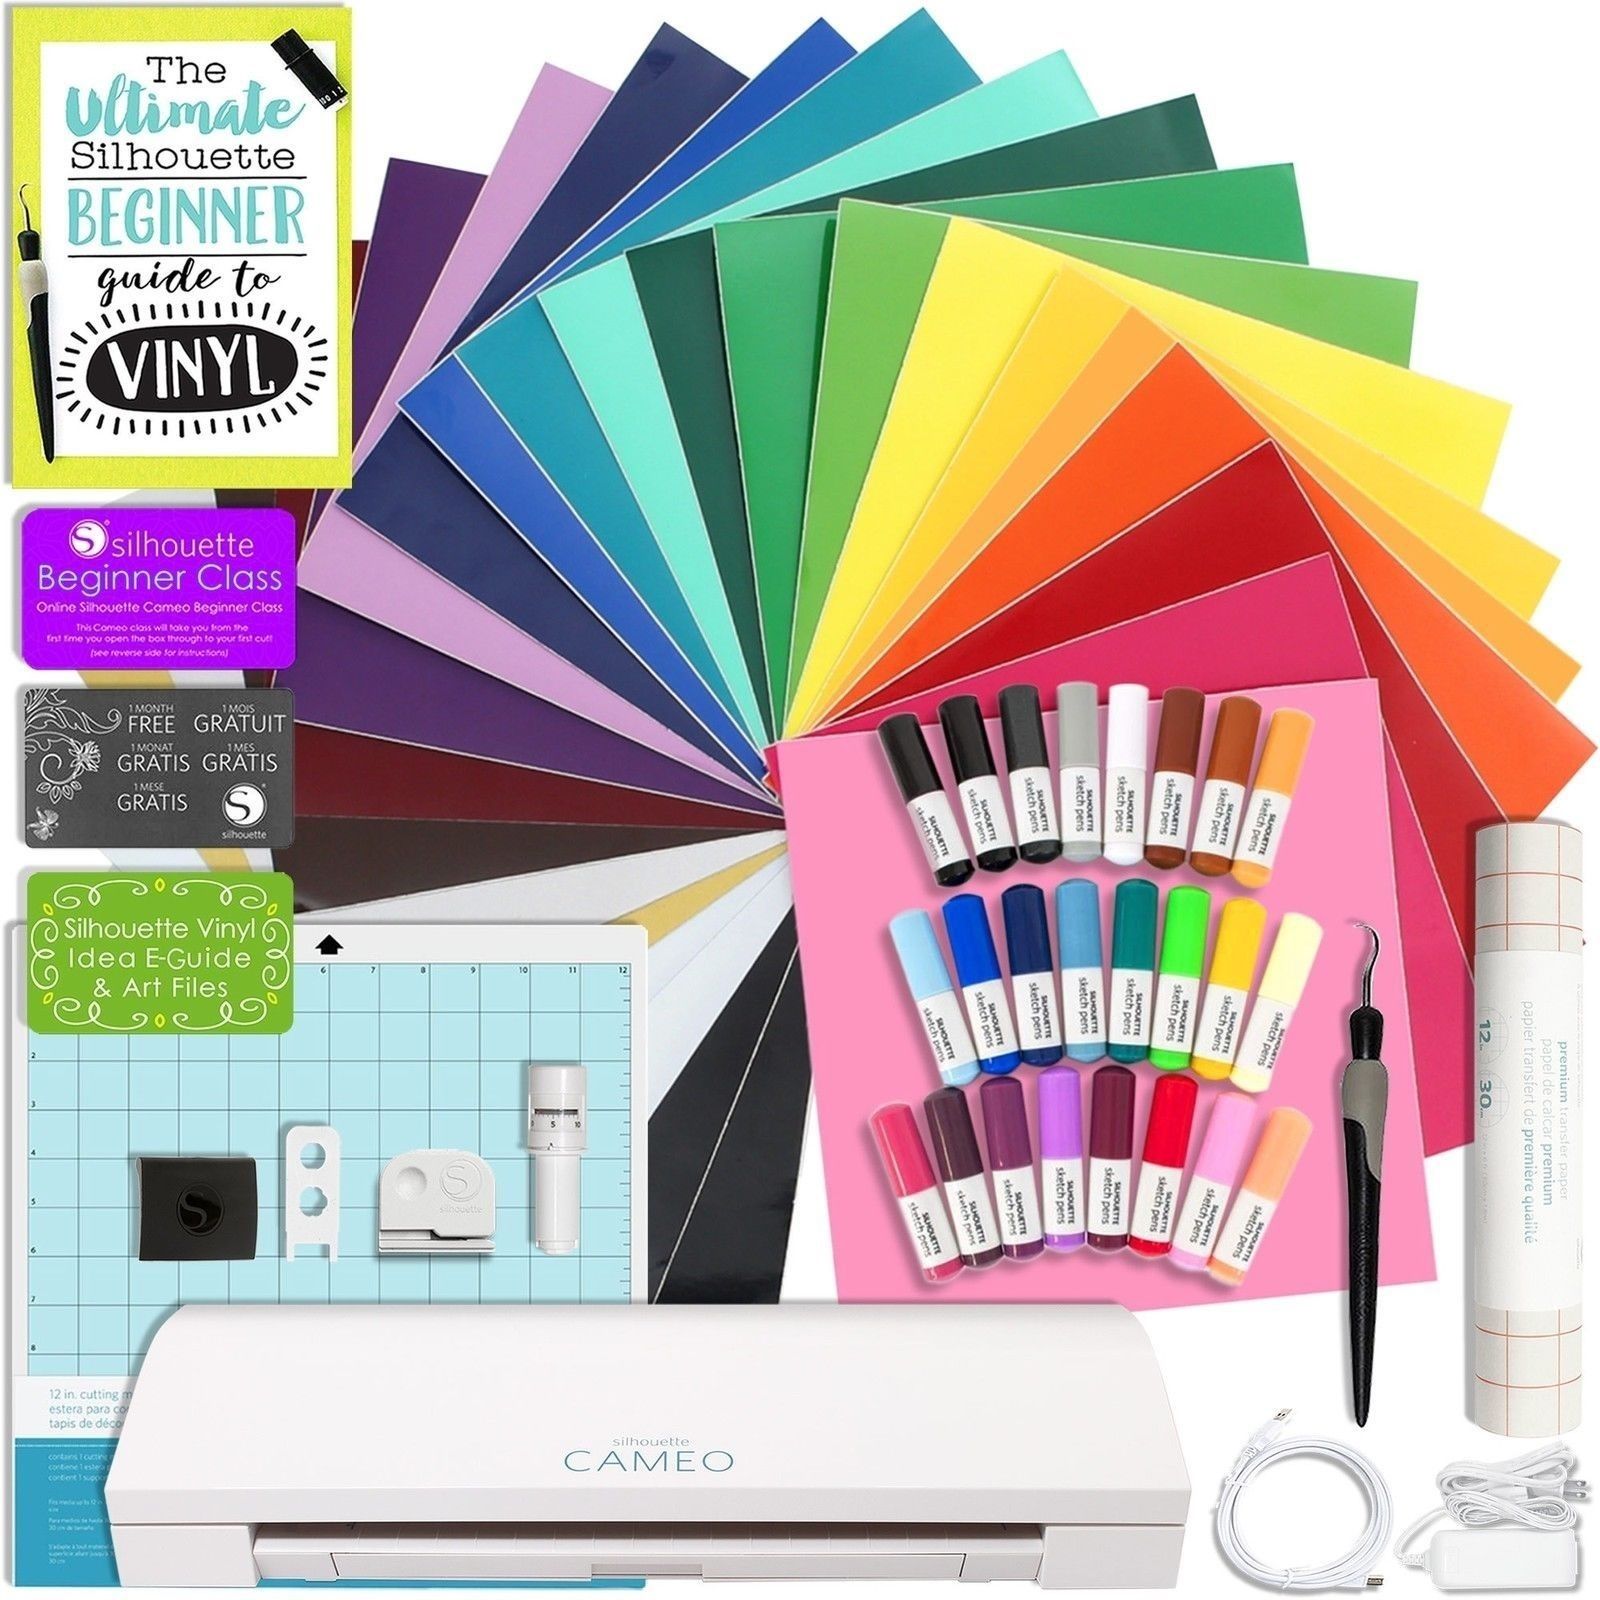 Our clearance offers a great way to save money and obtain Cricut Ultimate Fine  Point Pen Set, 30 Pack, Assorted NM